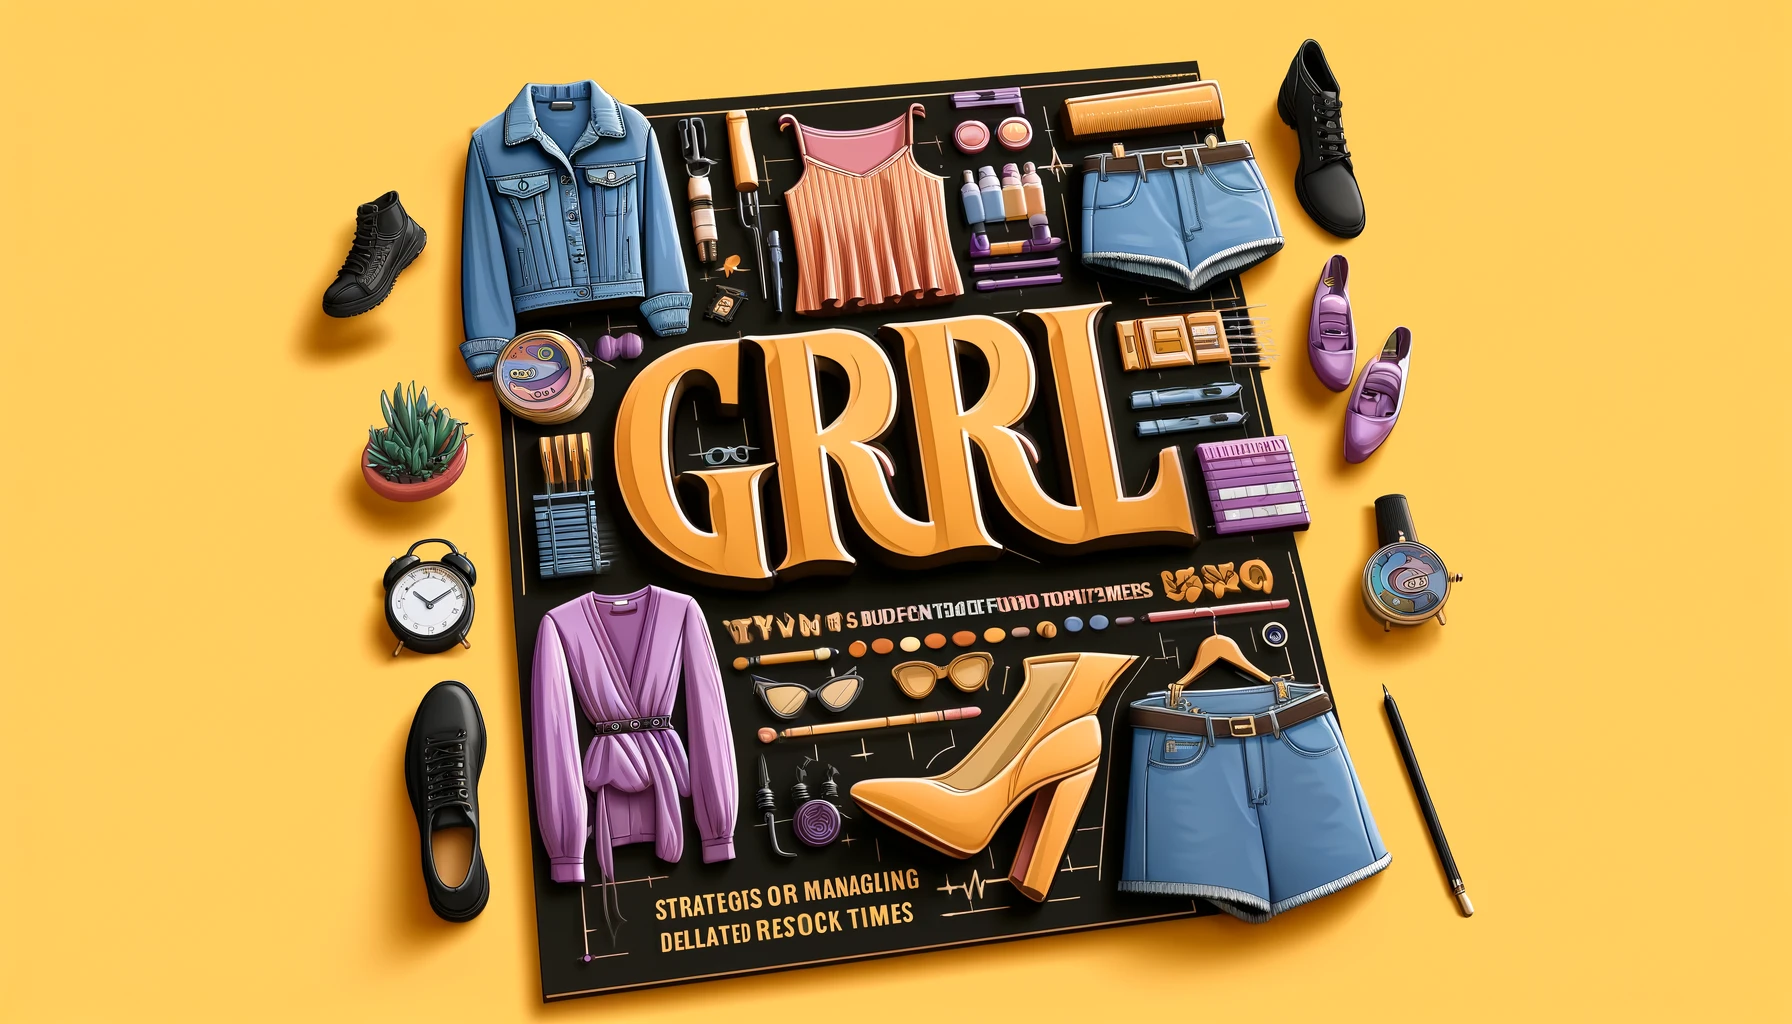 A stylish layout for a women's budget fashion brand named 'GRL' with a focus on handling delayed restock times. The image features trendy and affordable clothing items displayed attractively, with visual elements representing strategies for managing delayed restock times. Incorporate the word 'GRL' prominently in the design. The background should be vibrant and fashionable, reflecting the brand's appeal to young women. The image should be in a 16:9 aspect ratio.